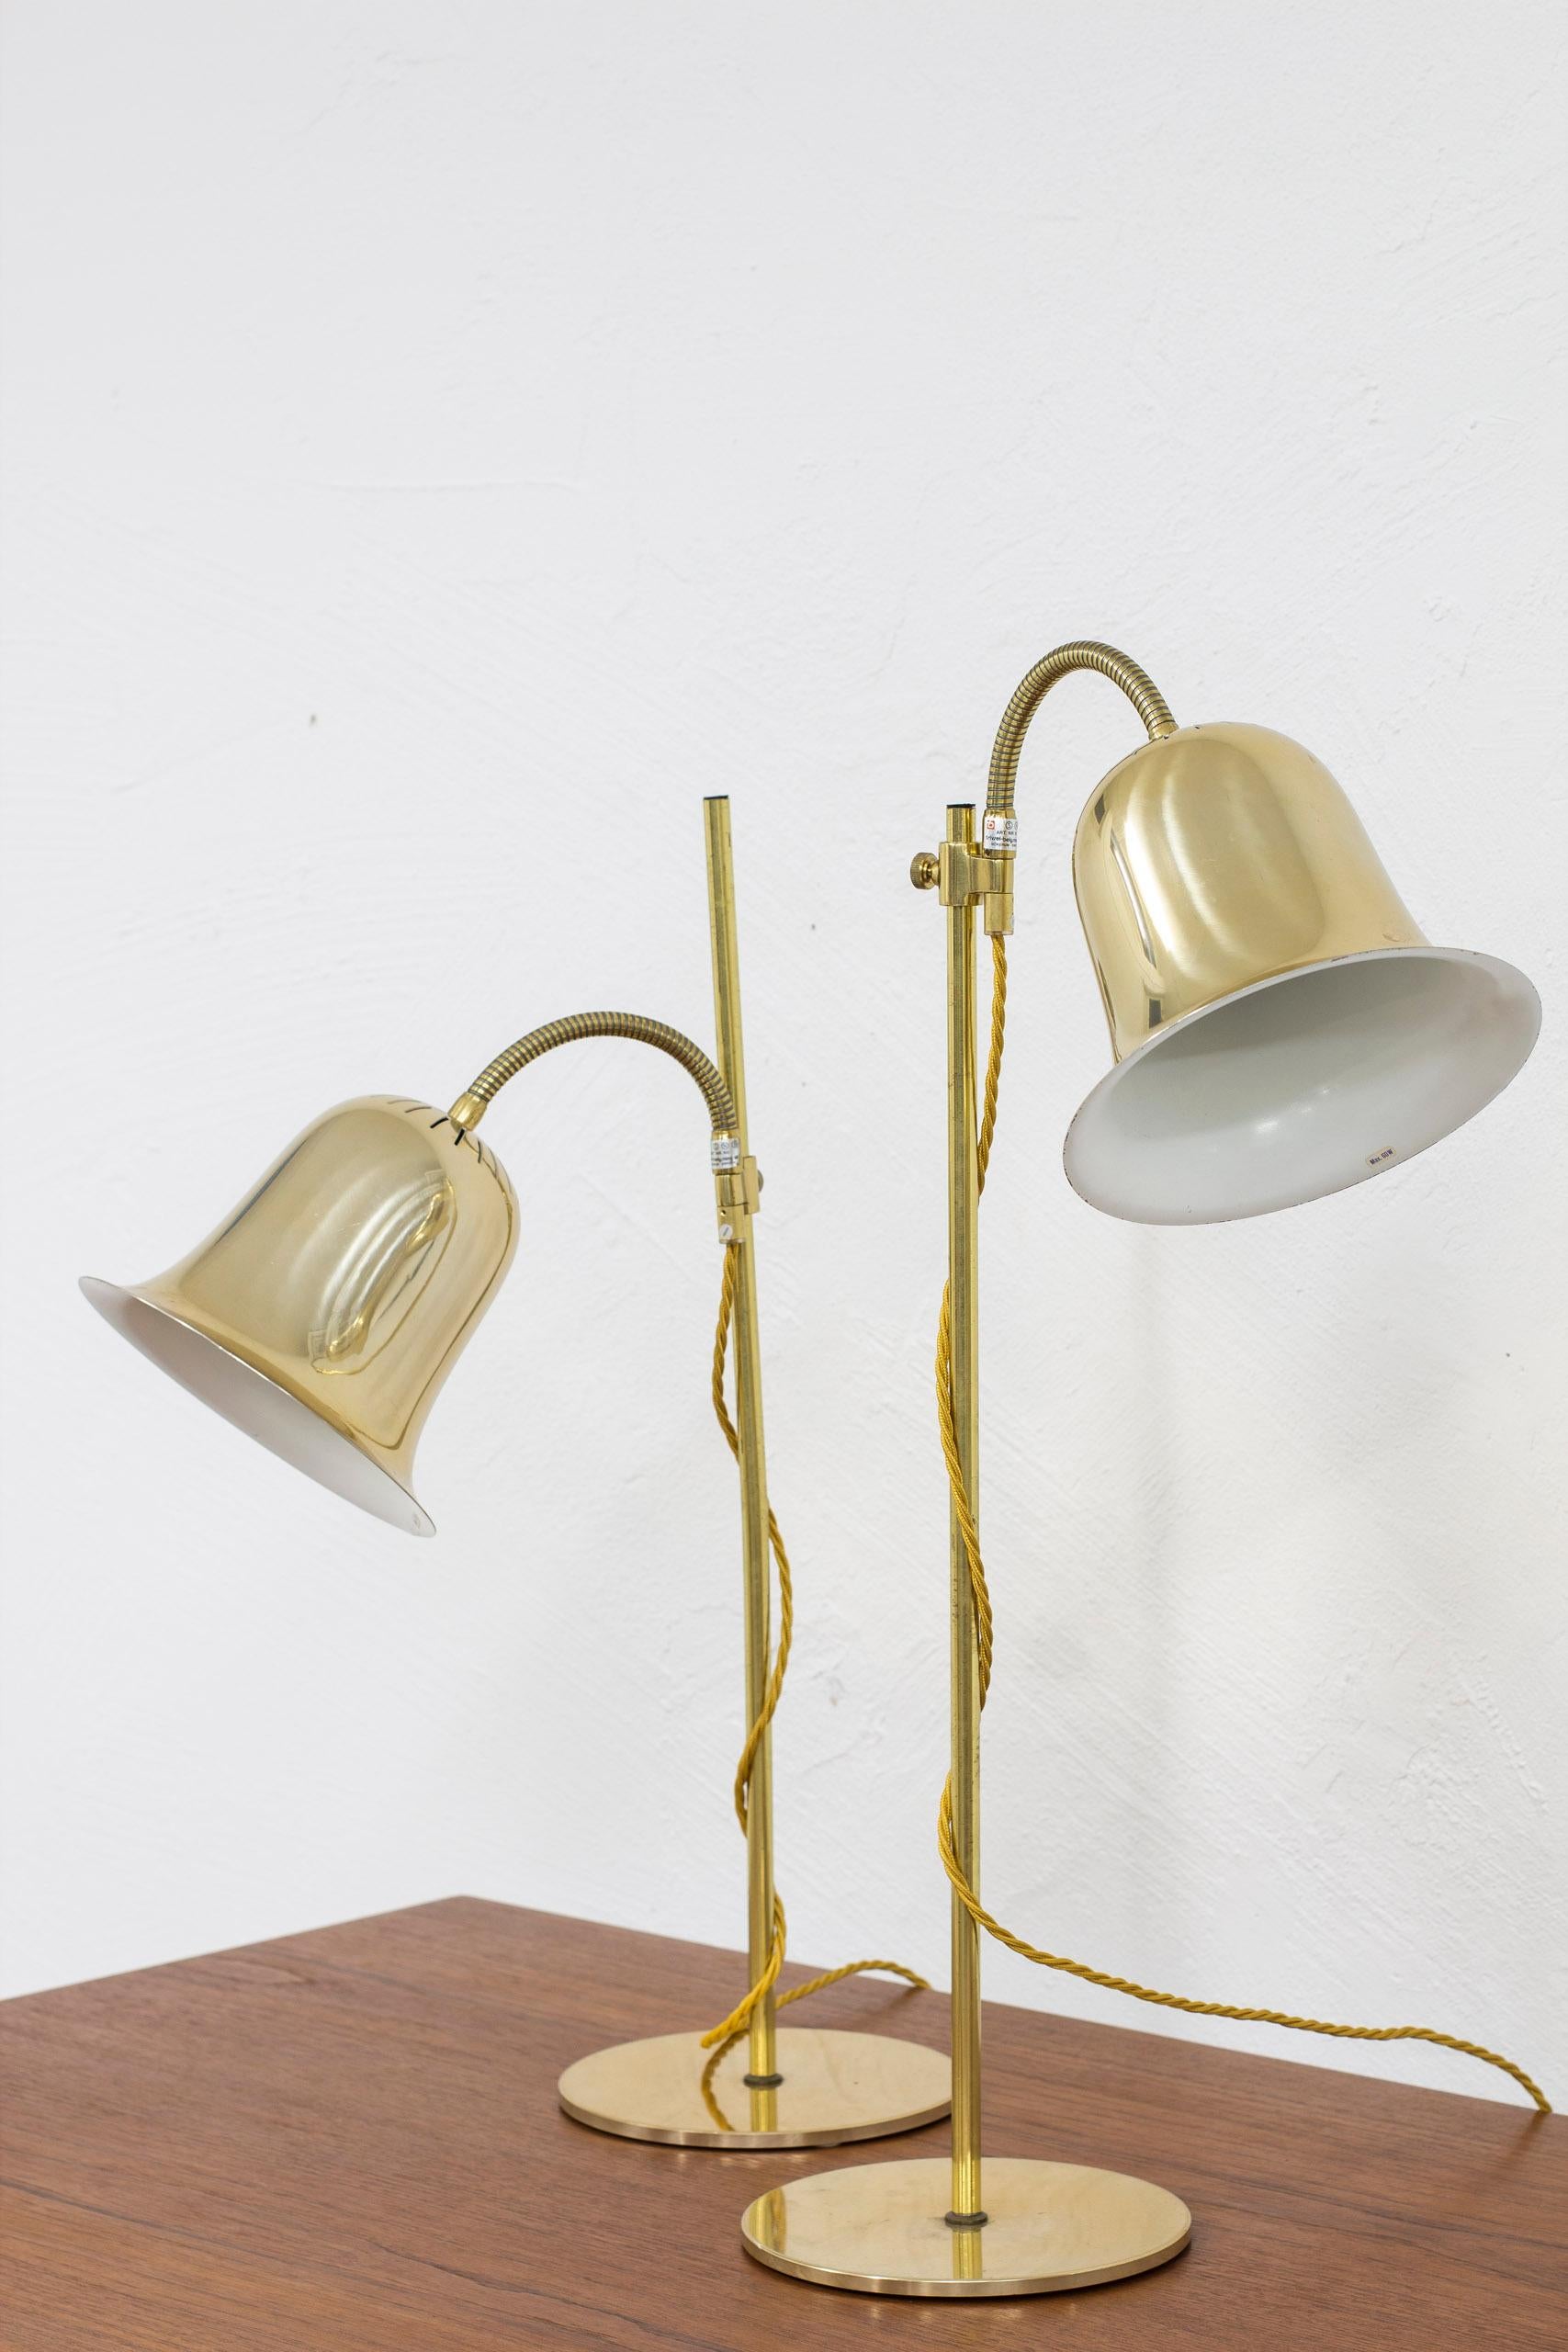 Swedish Scandinavian Modern Mid Century Table Lamps by Trivselbelysning in Brass, 1970s For Sale